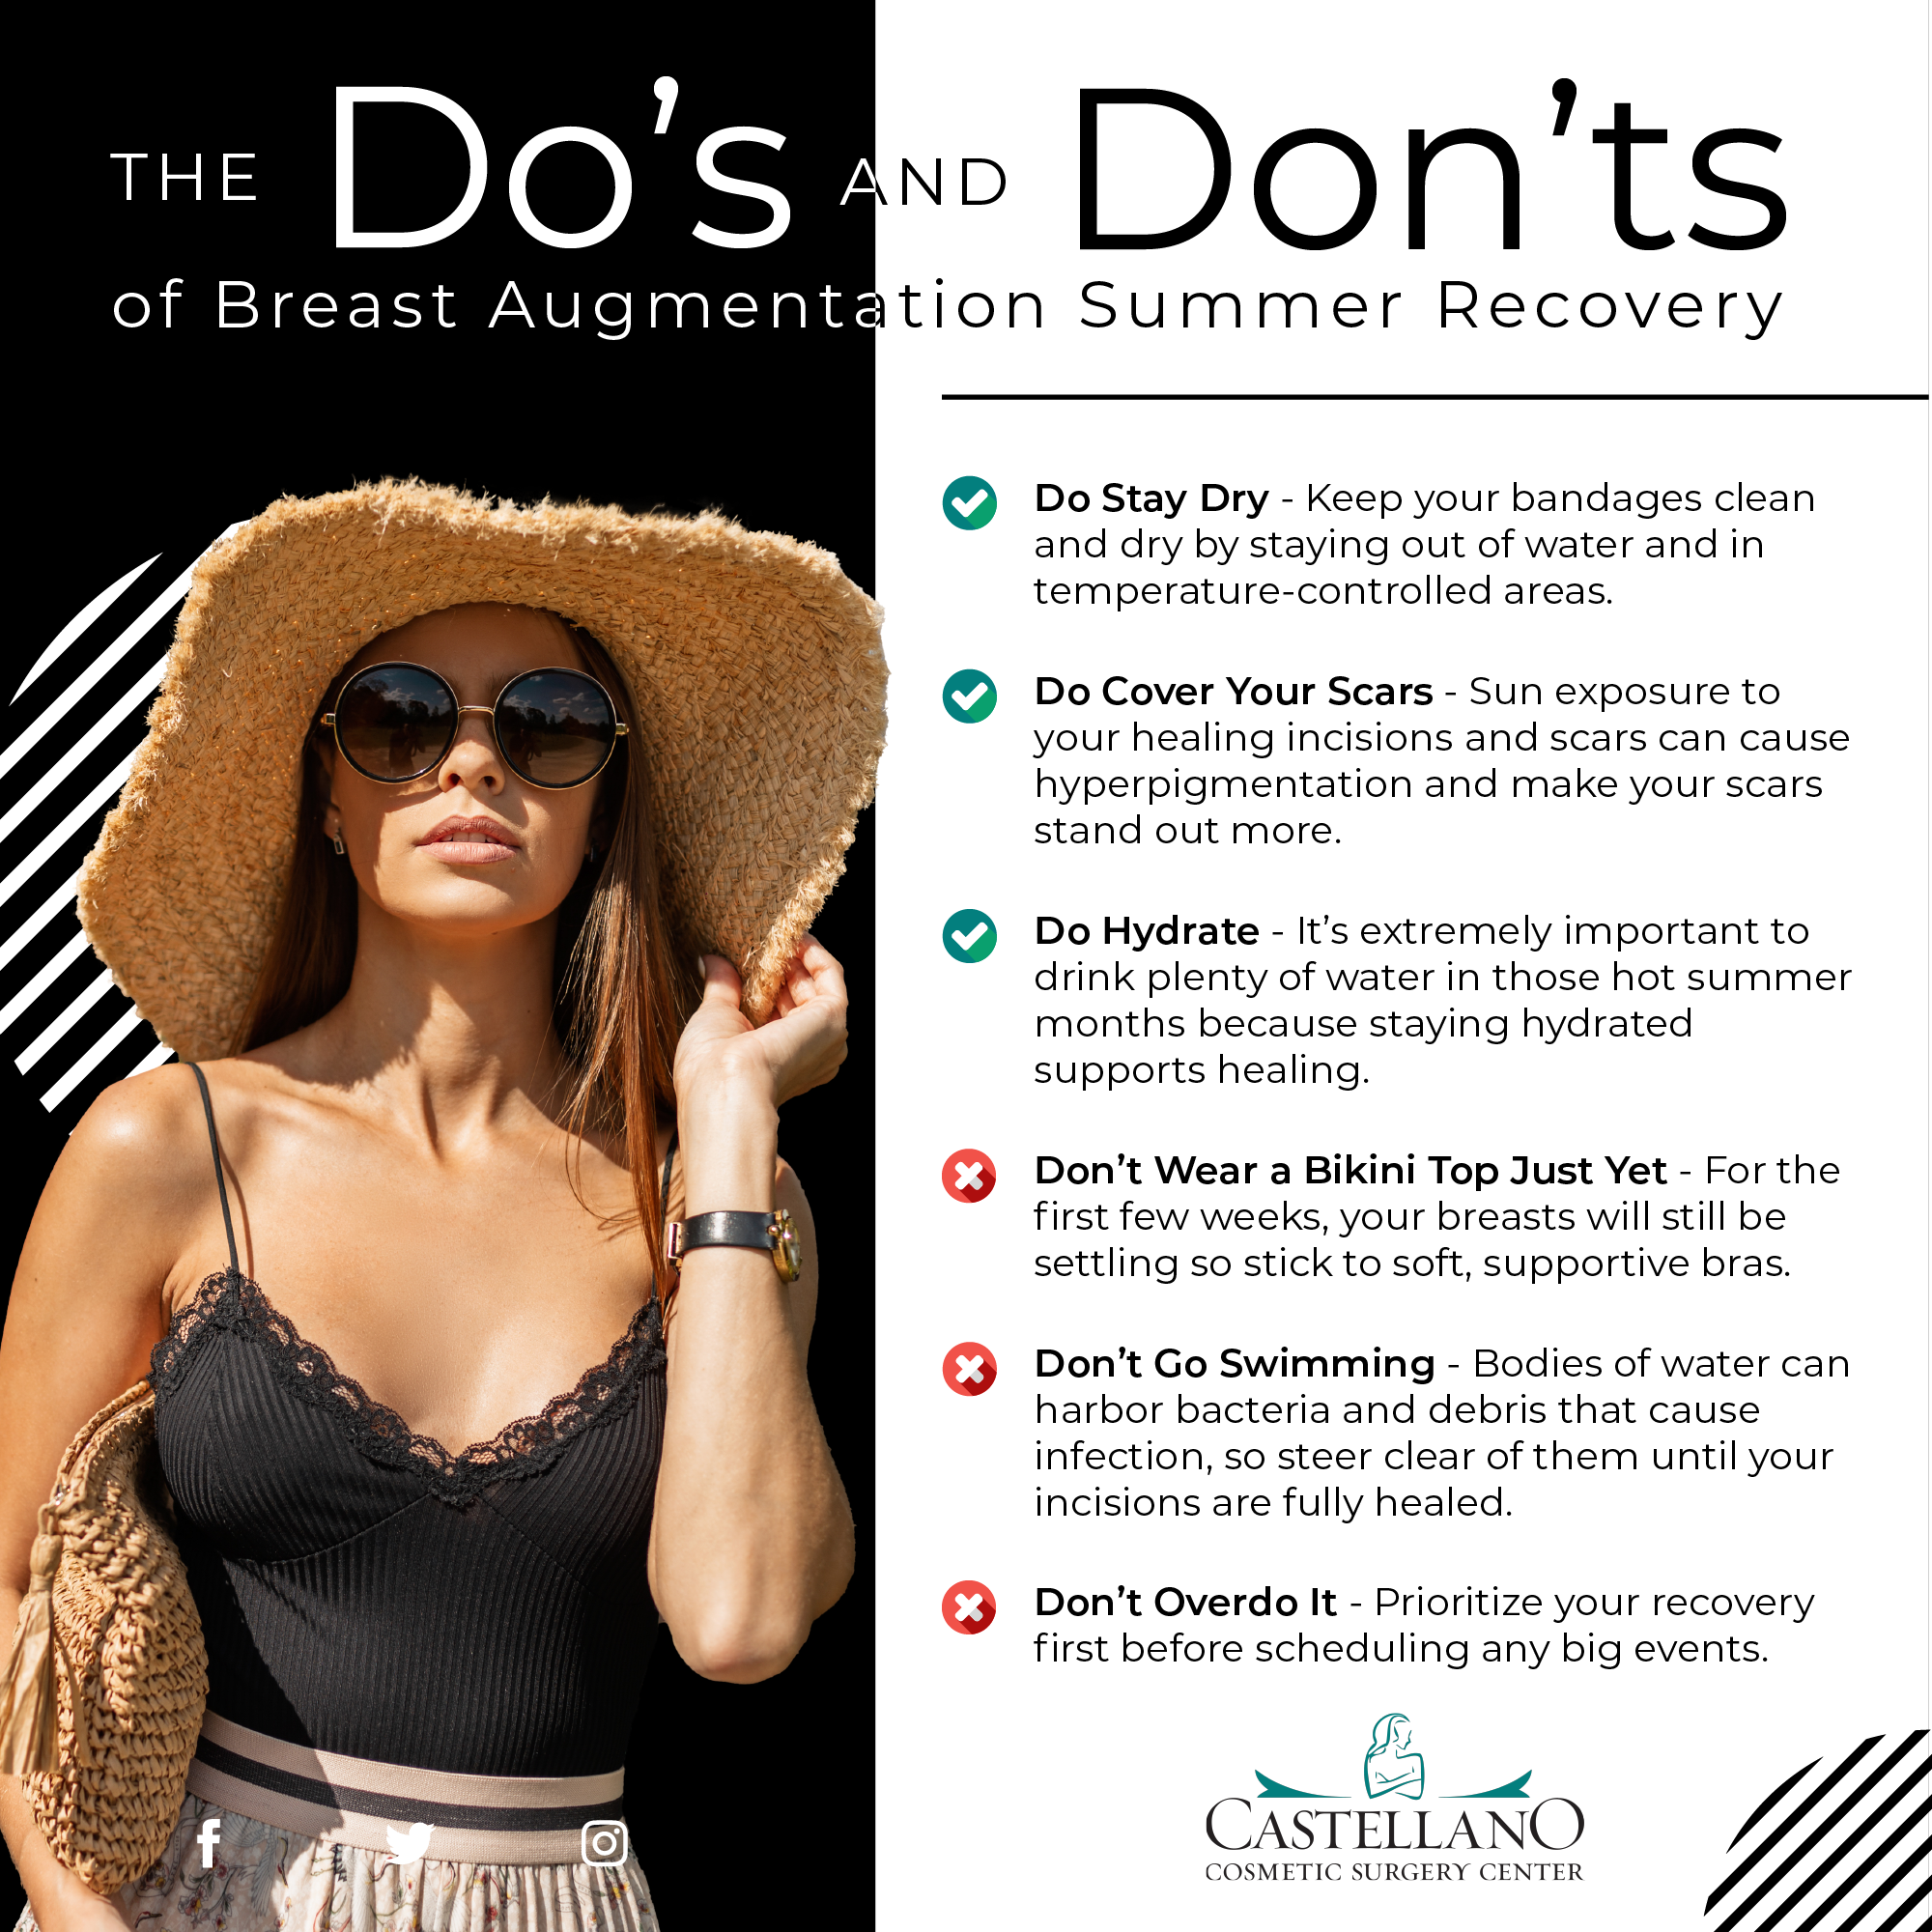 The Do’s and Don’ts of Breast Augmentation Summer Recovery